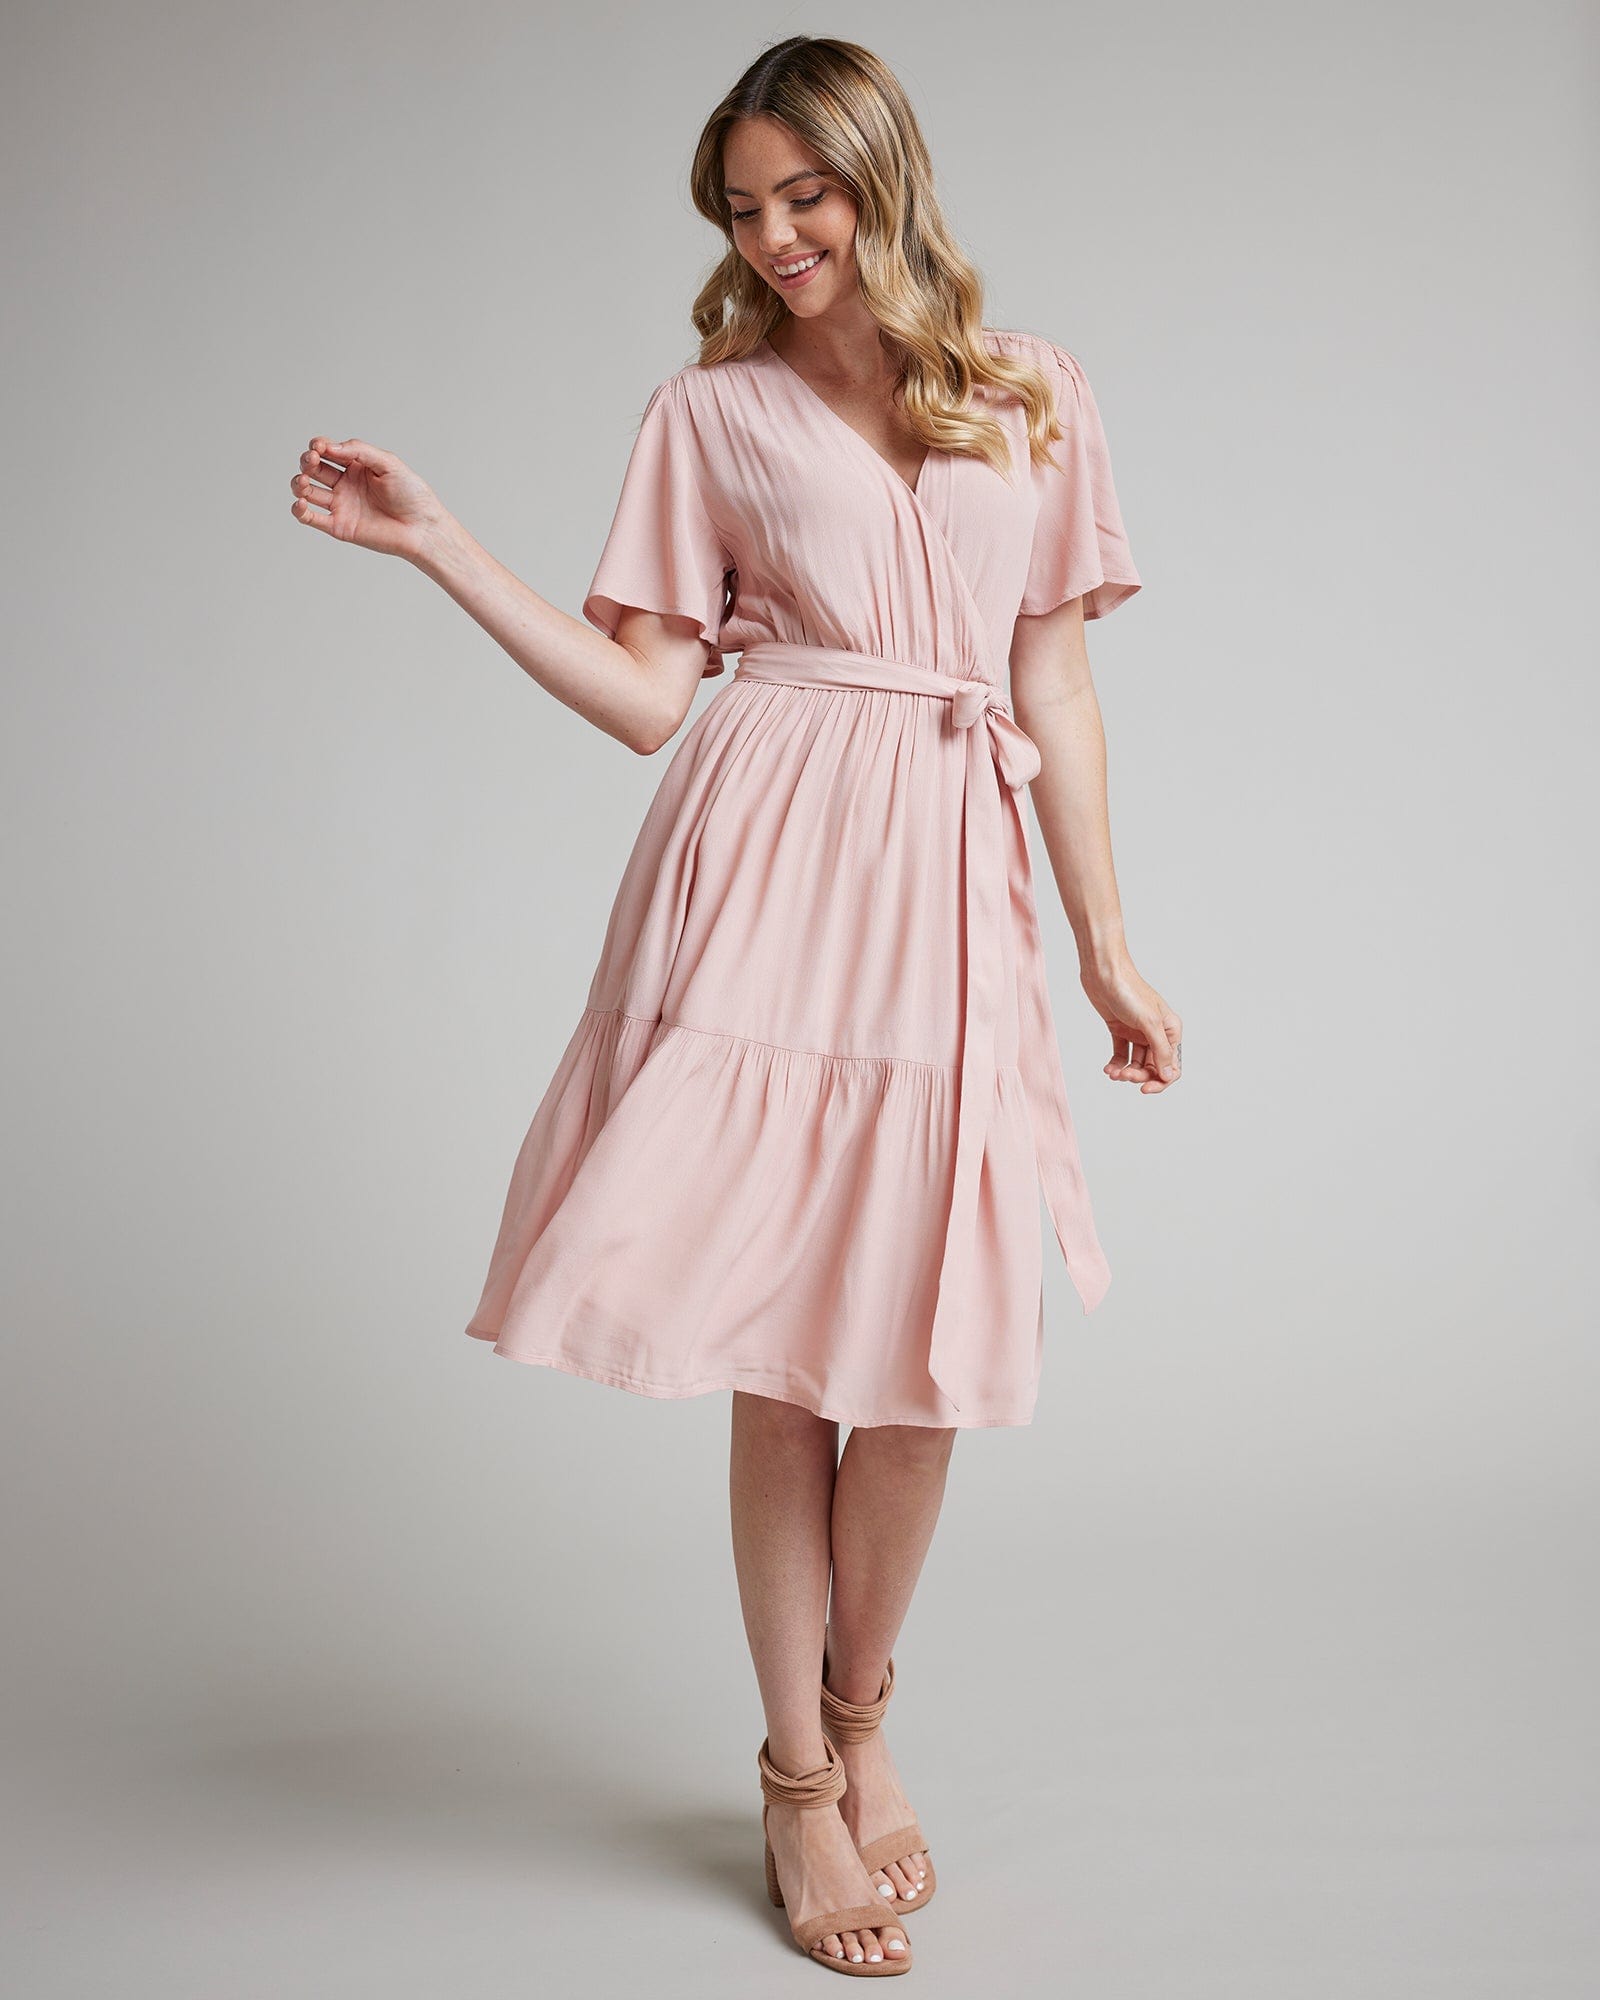 Woman in a short sleeve, knee-length, pink wrap dress